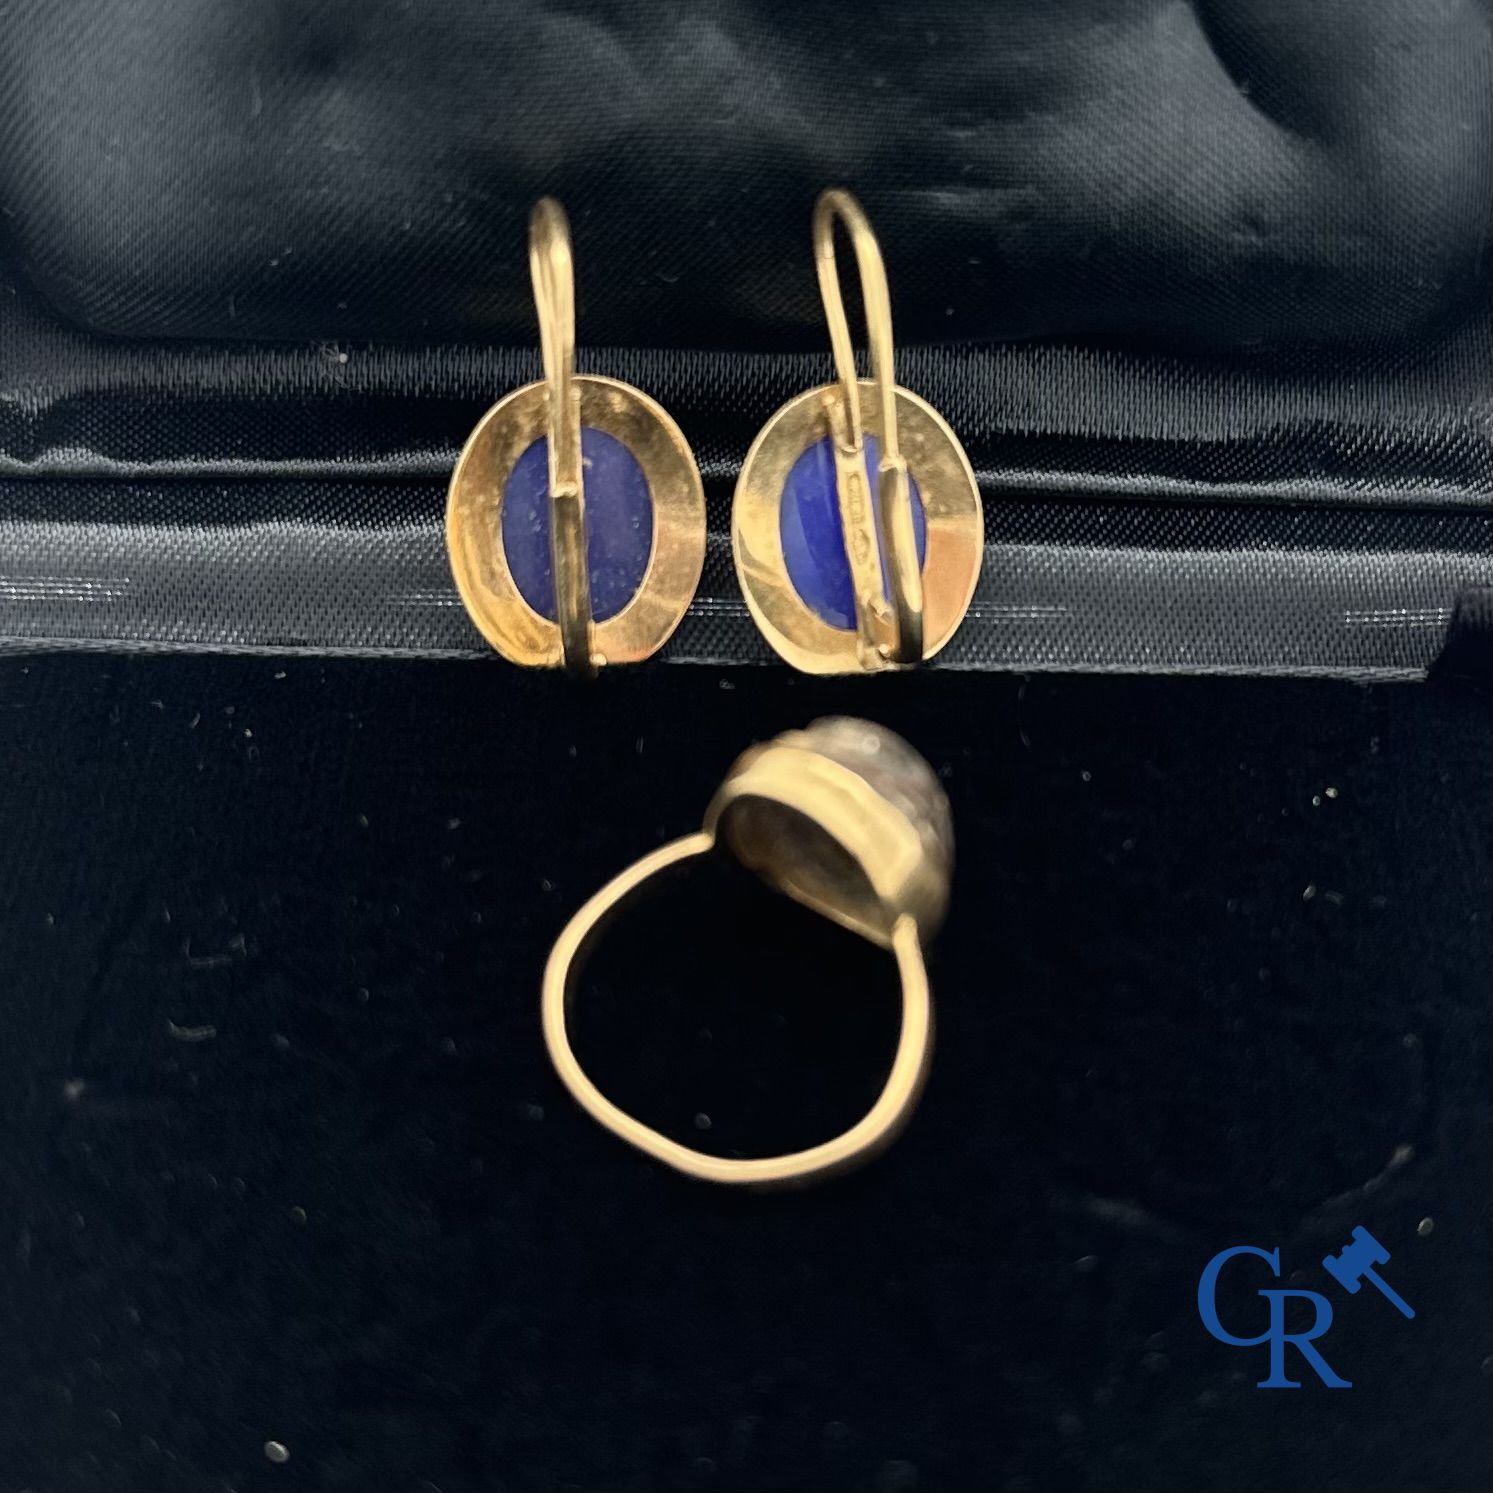 Jewellery: Lot consisting of a ring in gold 18K and a pair of earrings in gold 18K. - Image 2 of 4